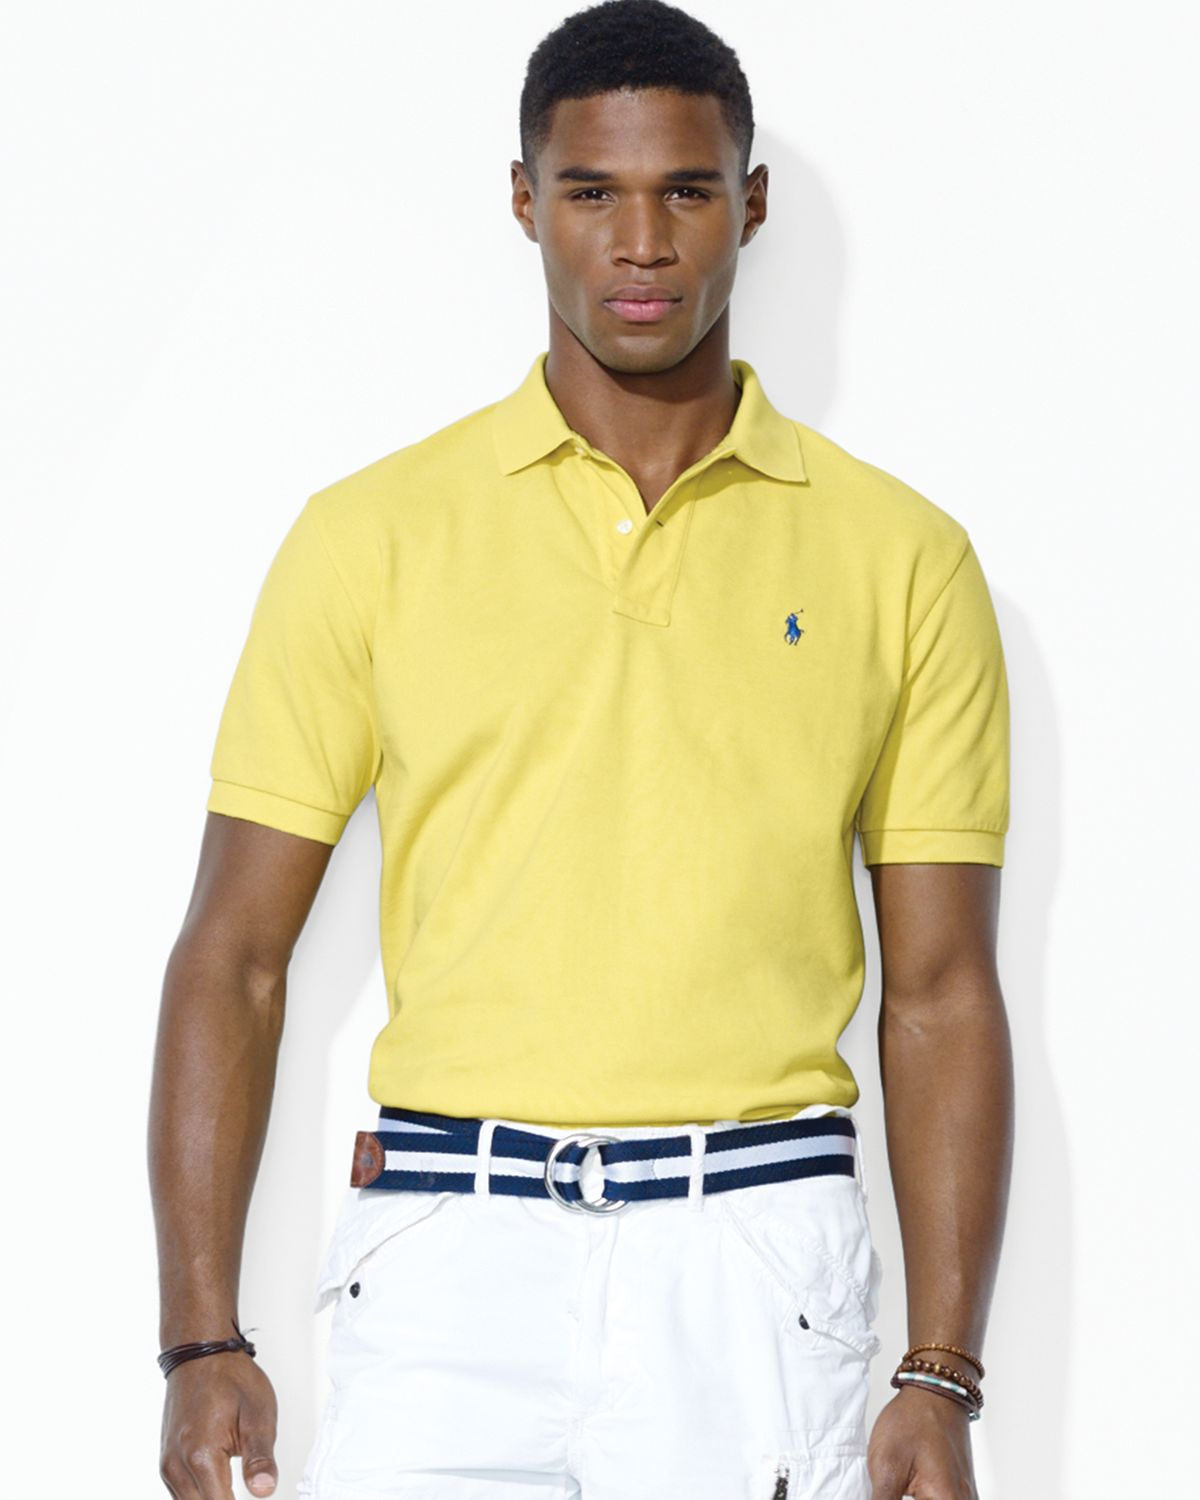 Ralph Lauren Polo Classic Fit Mesh Polo Shirt in Yellow for Men - Lyst